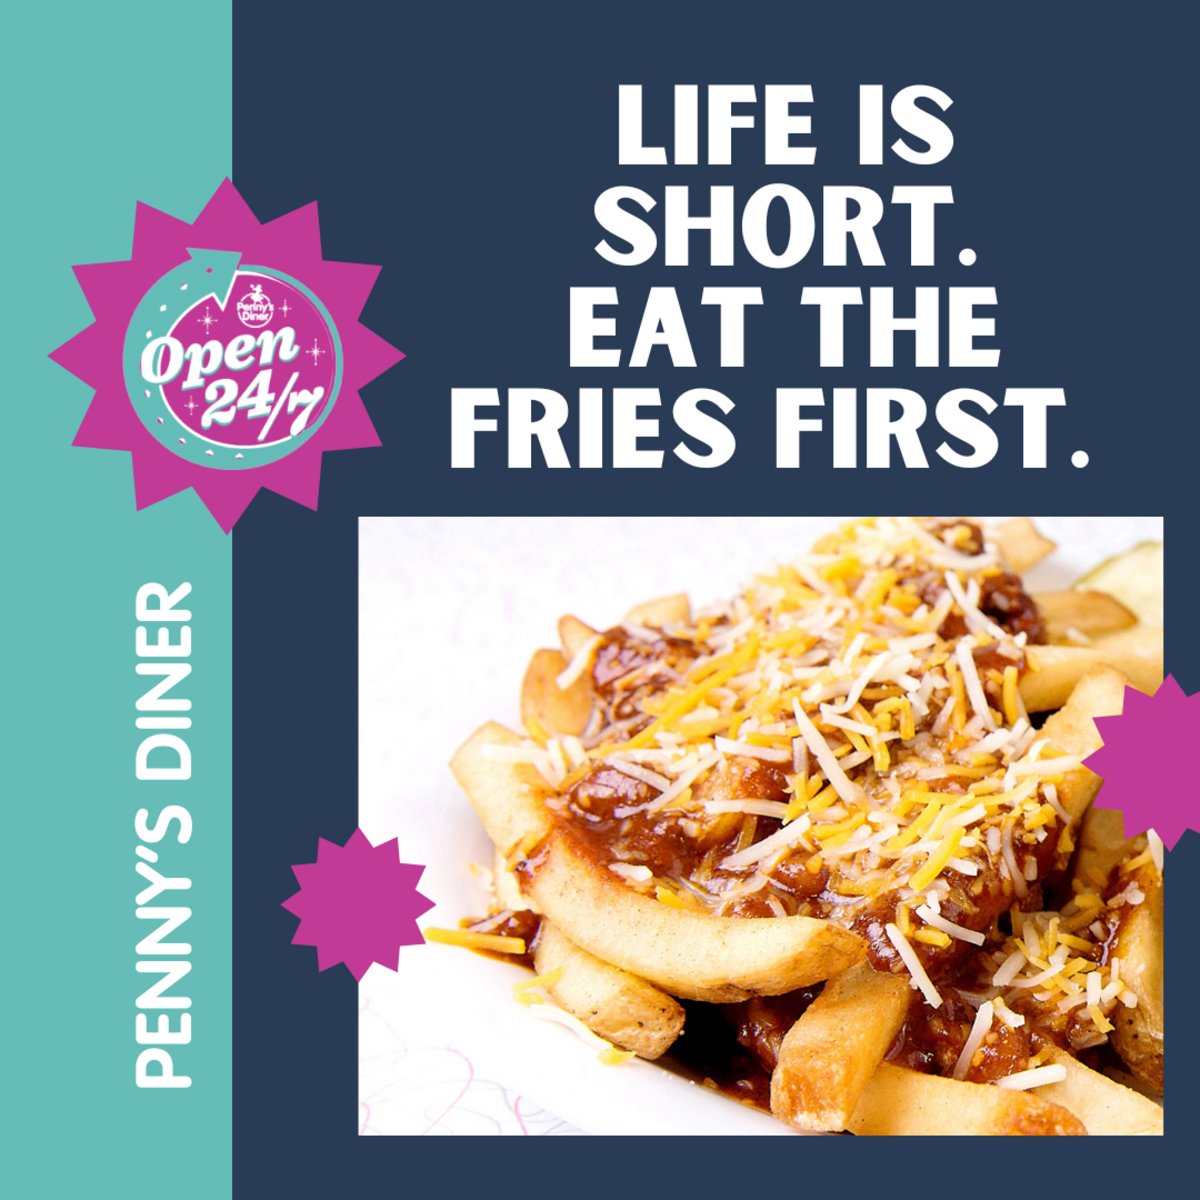 Like we always say at Penny's Diner Glendive, chili cheese the day! Stop by and kick off your feast with a basket of our legendary #chilicheesefries. Get 'em while they're hot!🔥🍟 #PennysDiner